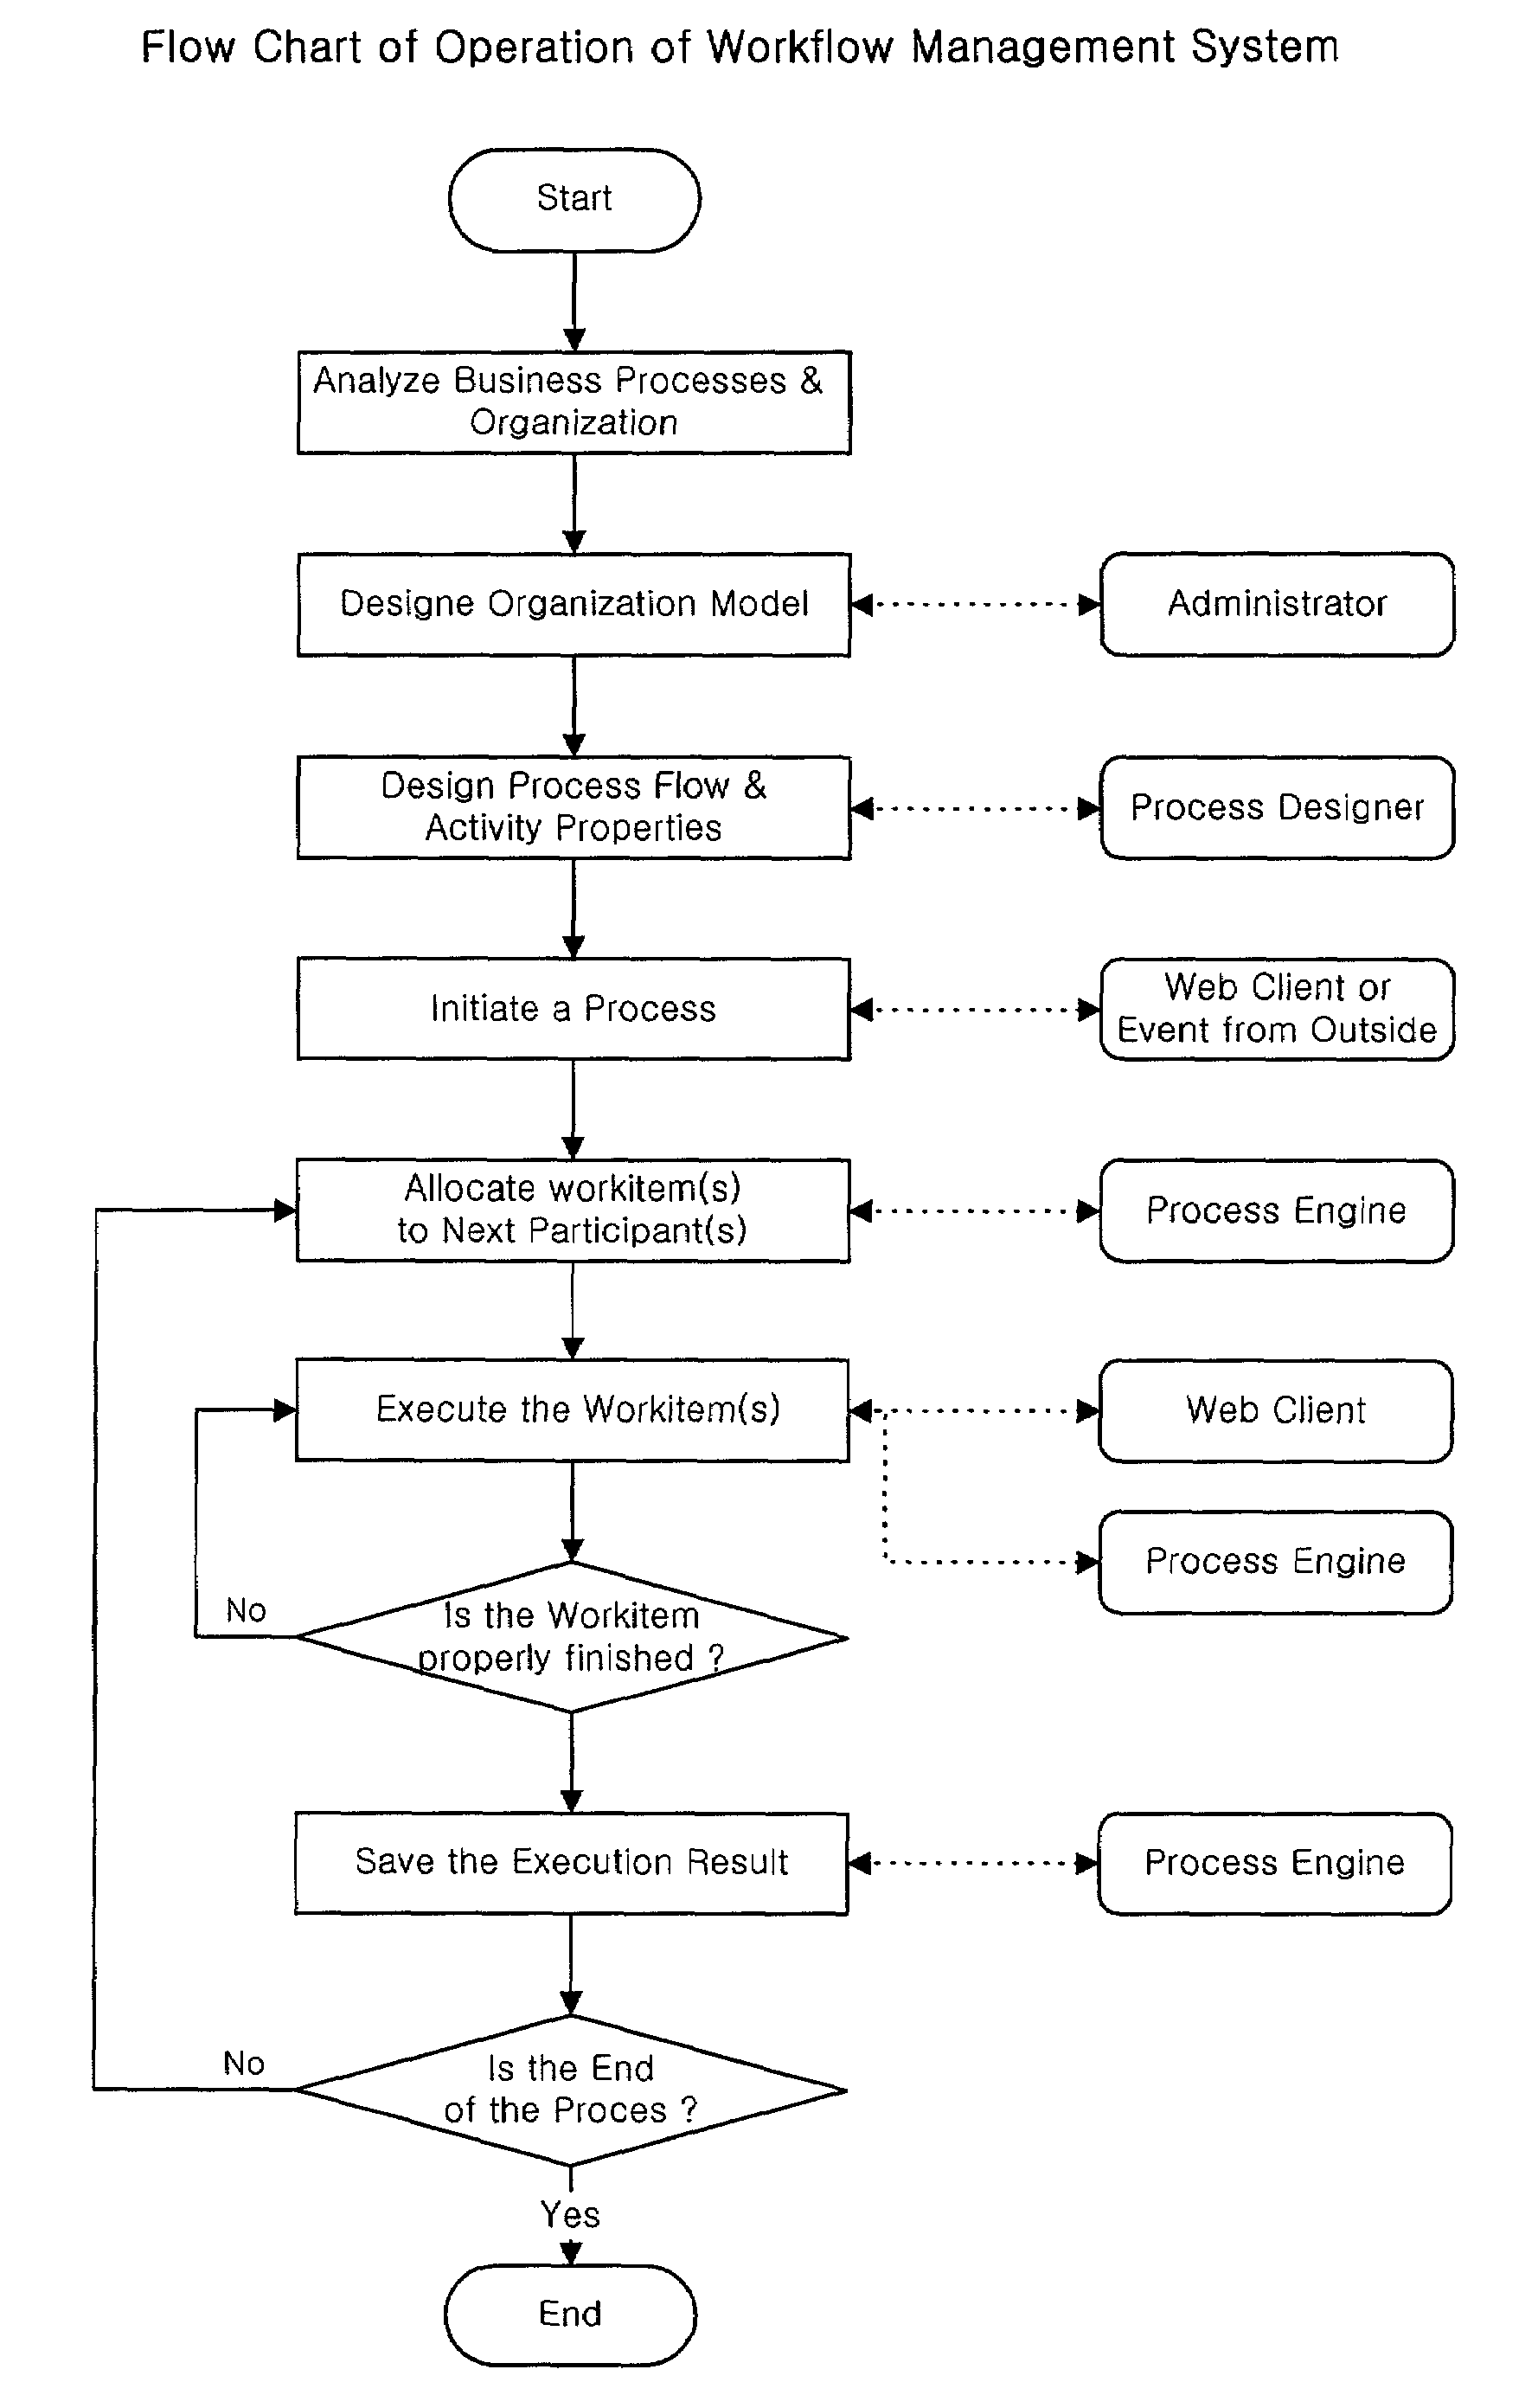 Systems and methods for automating a process of business decision making and workflow